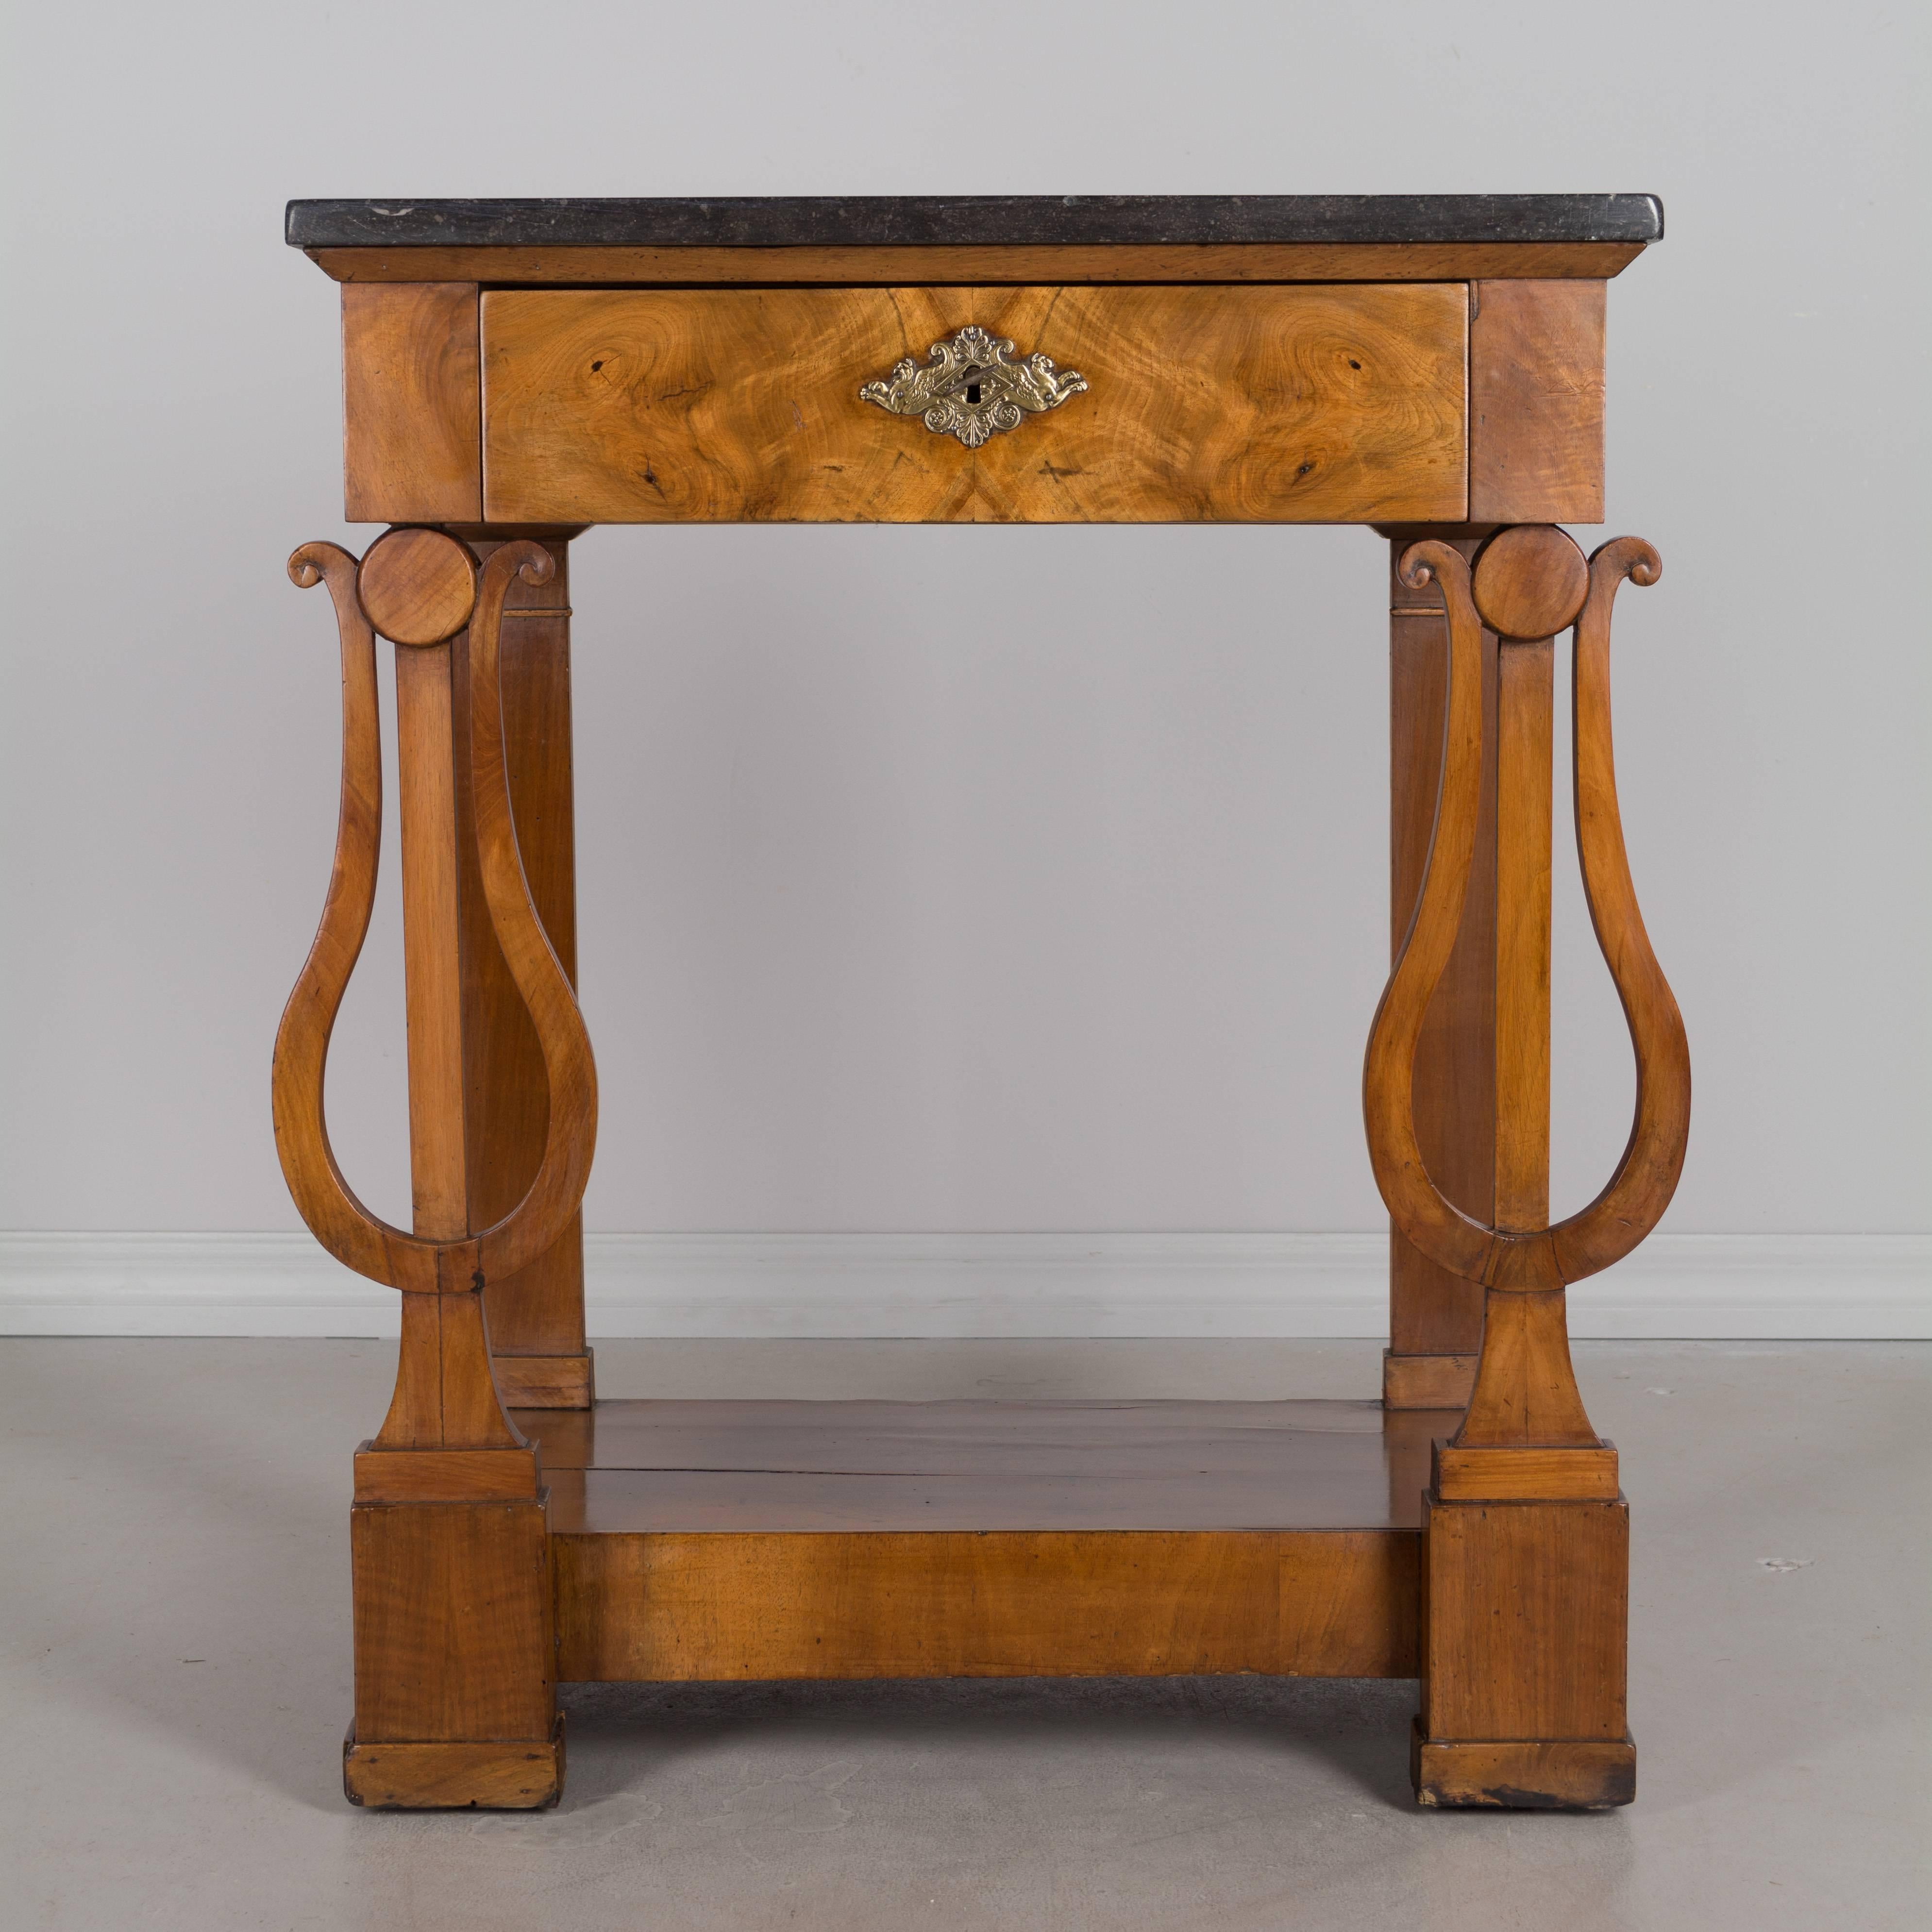 A 19th century French Empire console or side table with original black marble top. Beautifully carved walnut lyre shaped front legs. Dovetailed drawer with bookmatched veneer of walnut. Decorative brass escutcheon with lock and key in working order.